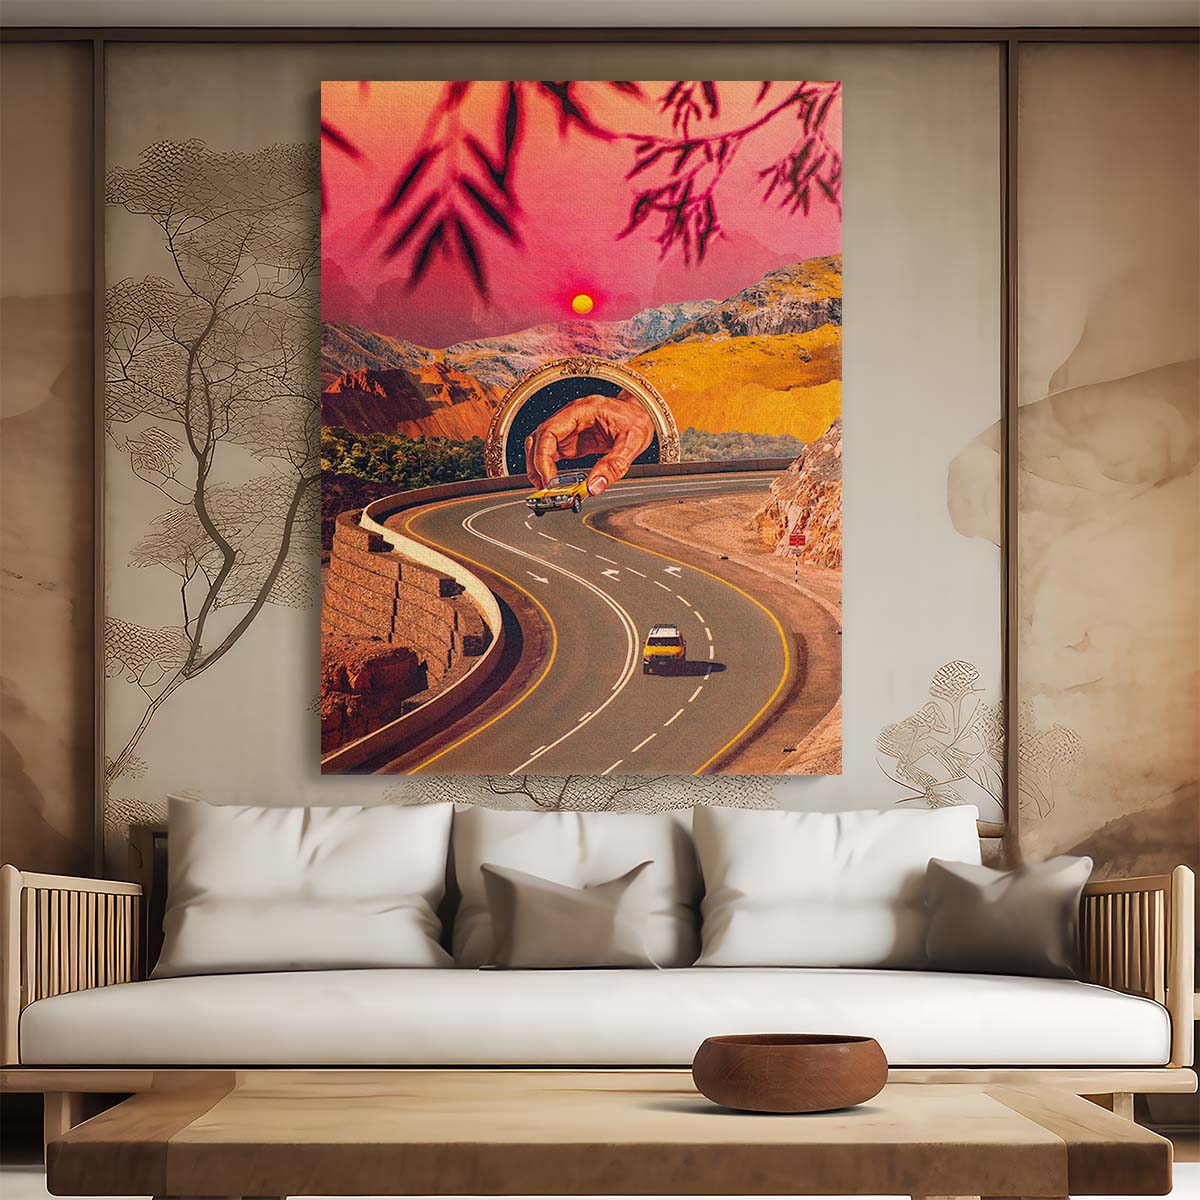 Vintage Car Road Trip Surreal Collage Illustration by Taudalpoi by Luxuriance Designs, made in USA